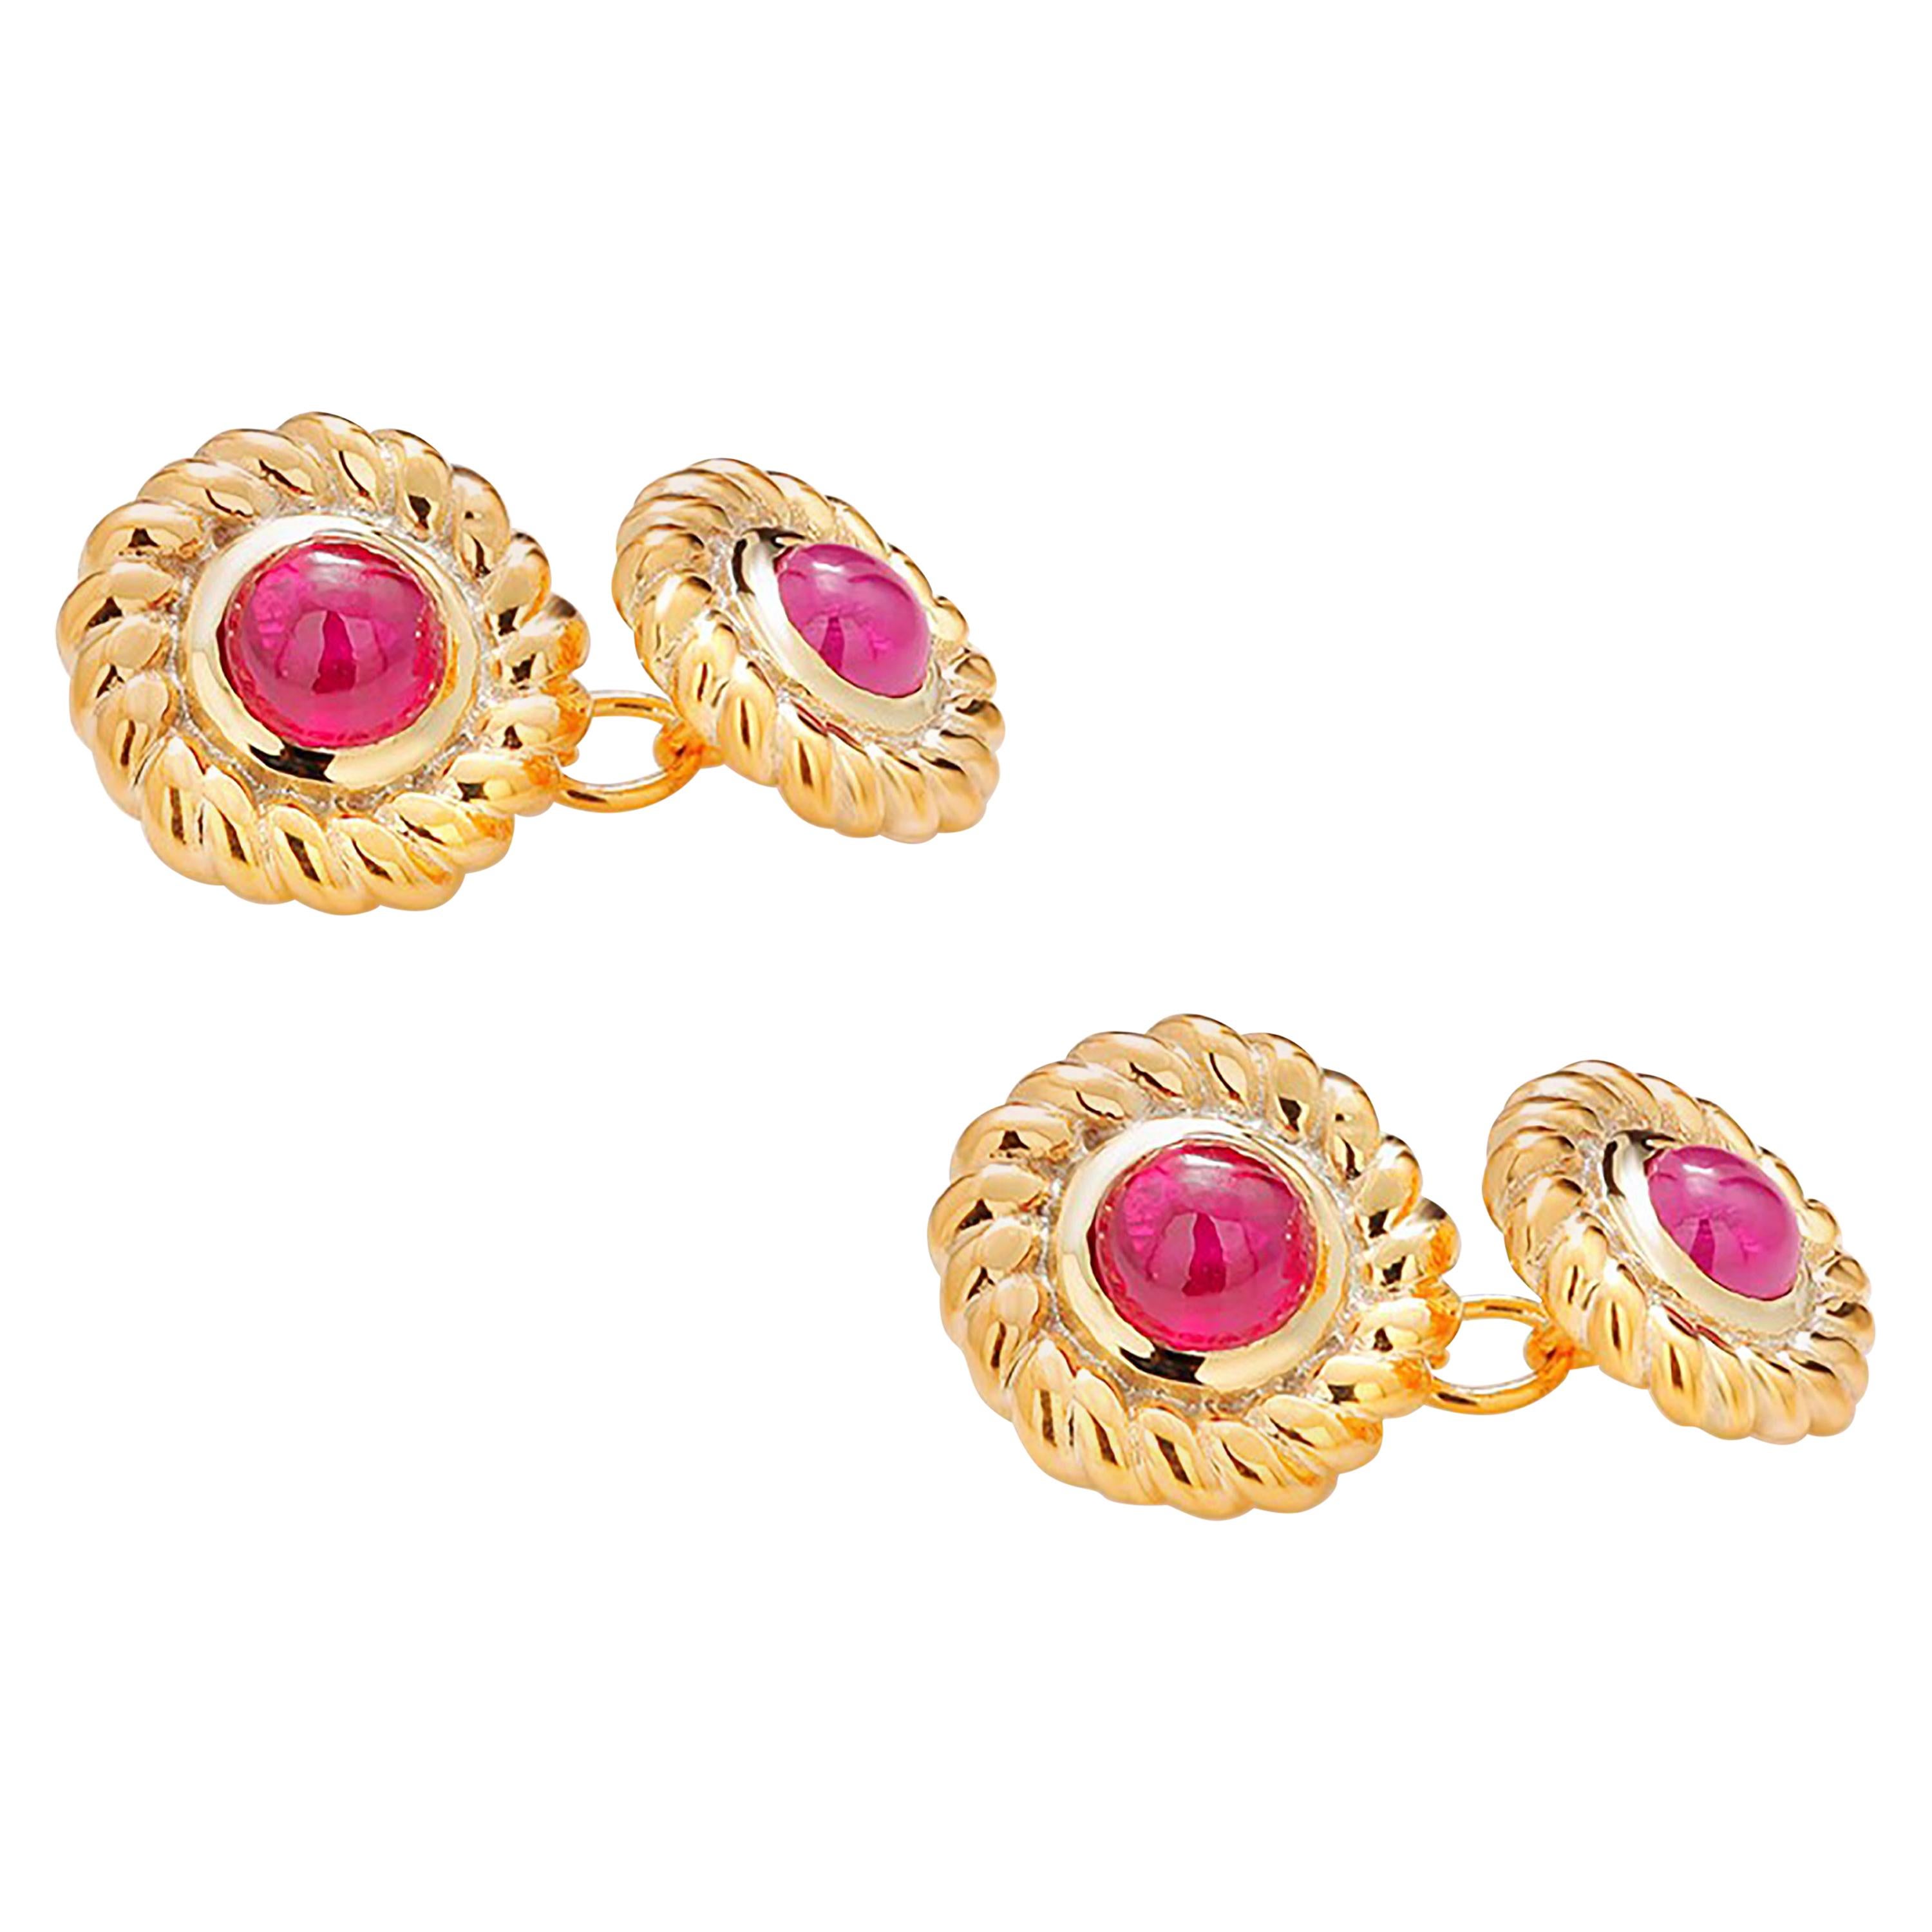 Double Sides Cufflinks Matched Pair of Cabochon Ruby